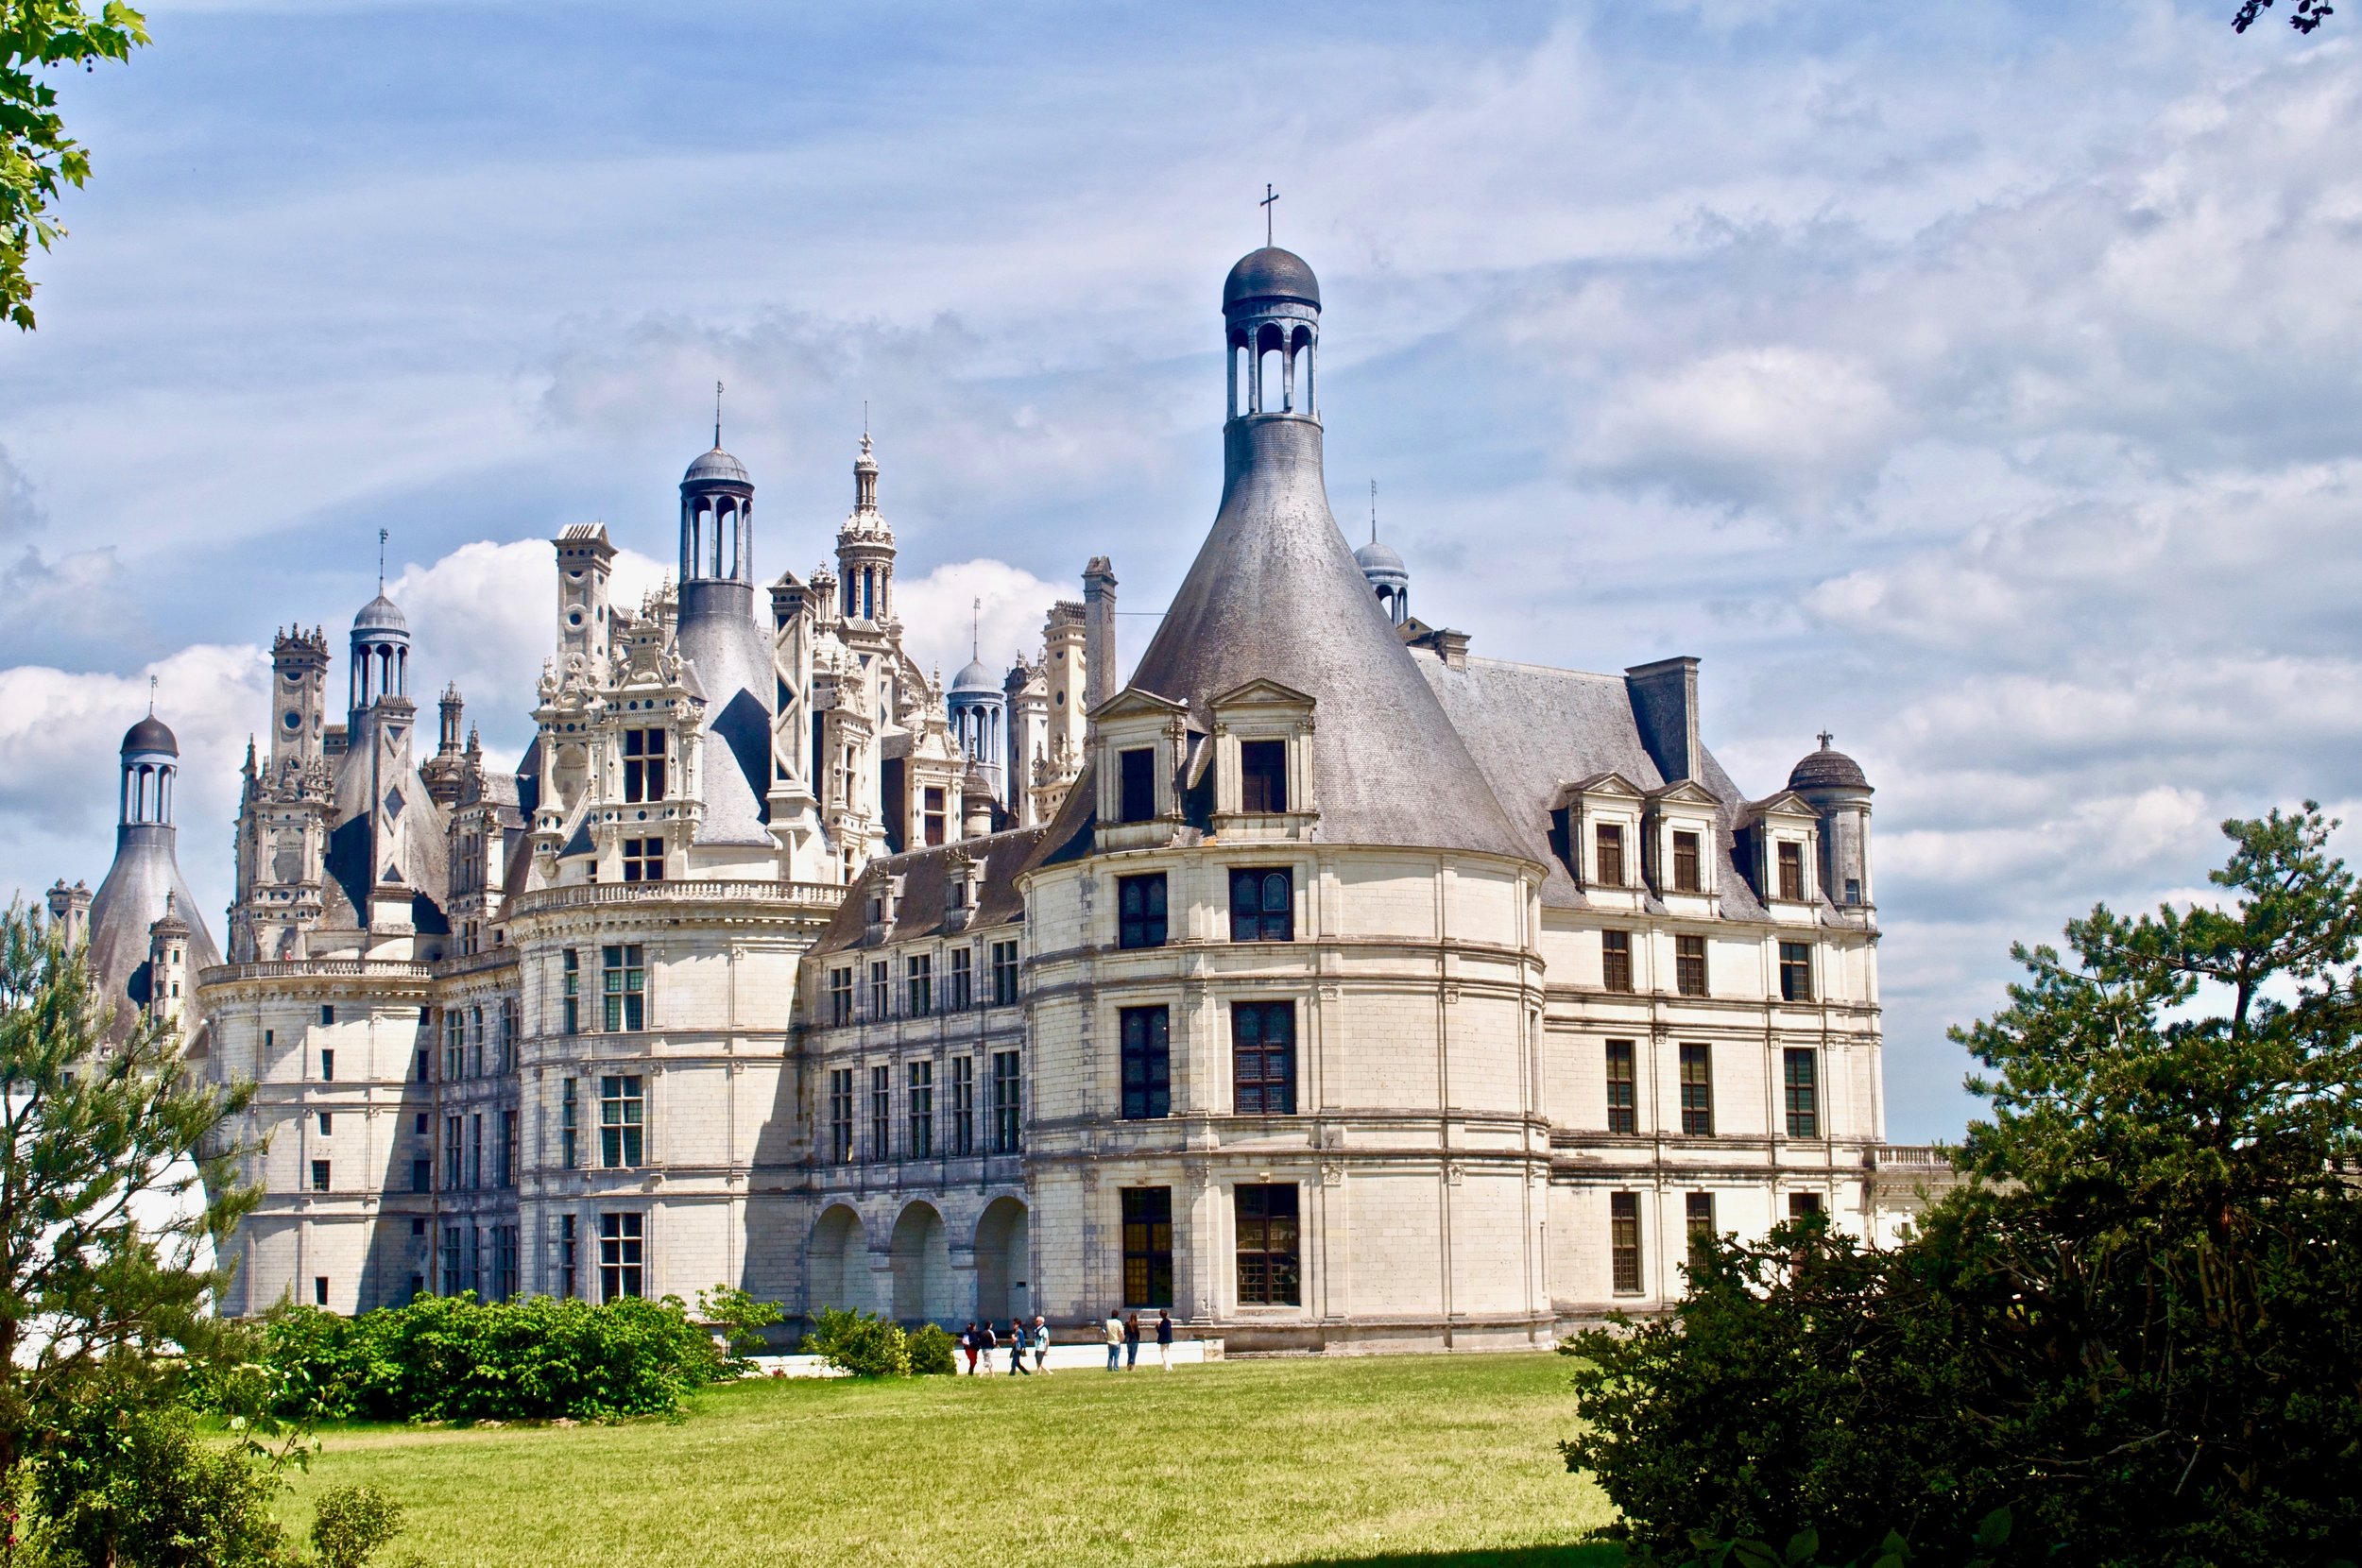 Chateau Chambord: a magnificent chateau in the Loire Valley